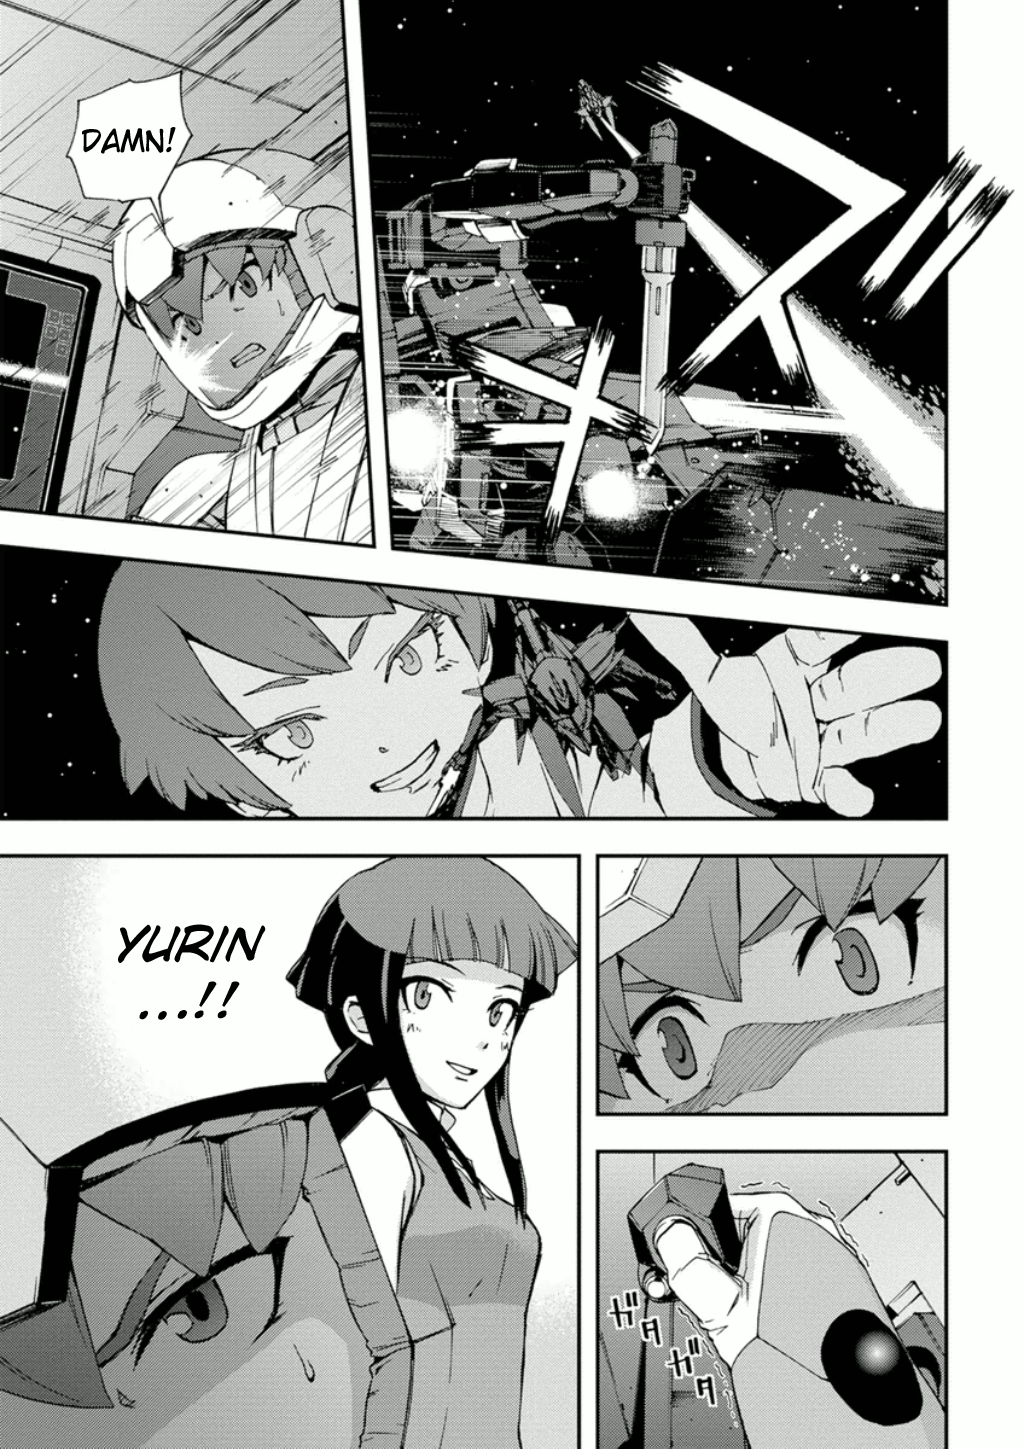 Mobile Suit Gundam AGE: First Evolution Vol.3 Chapter 9: Ambat the Space Fortress